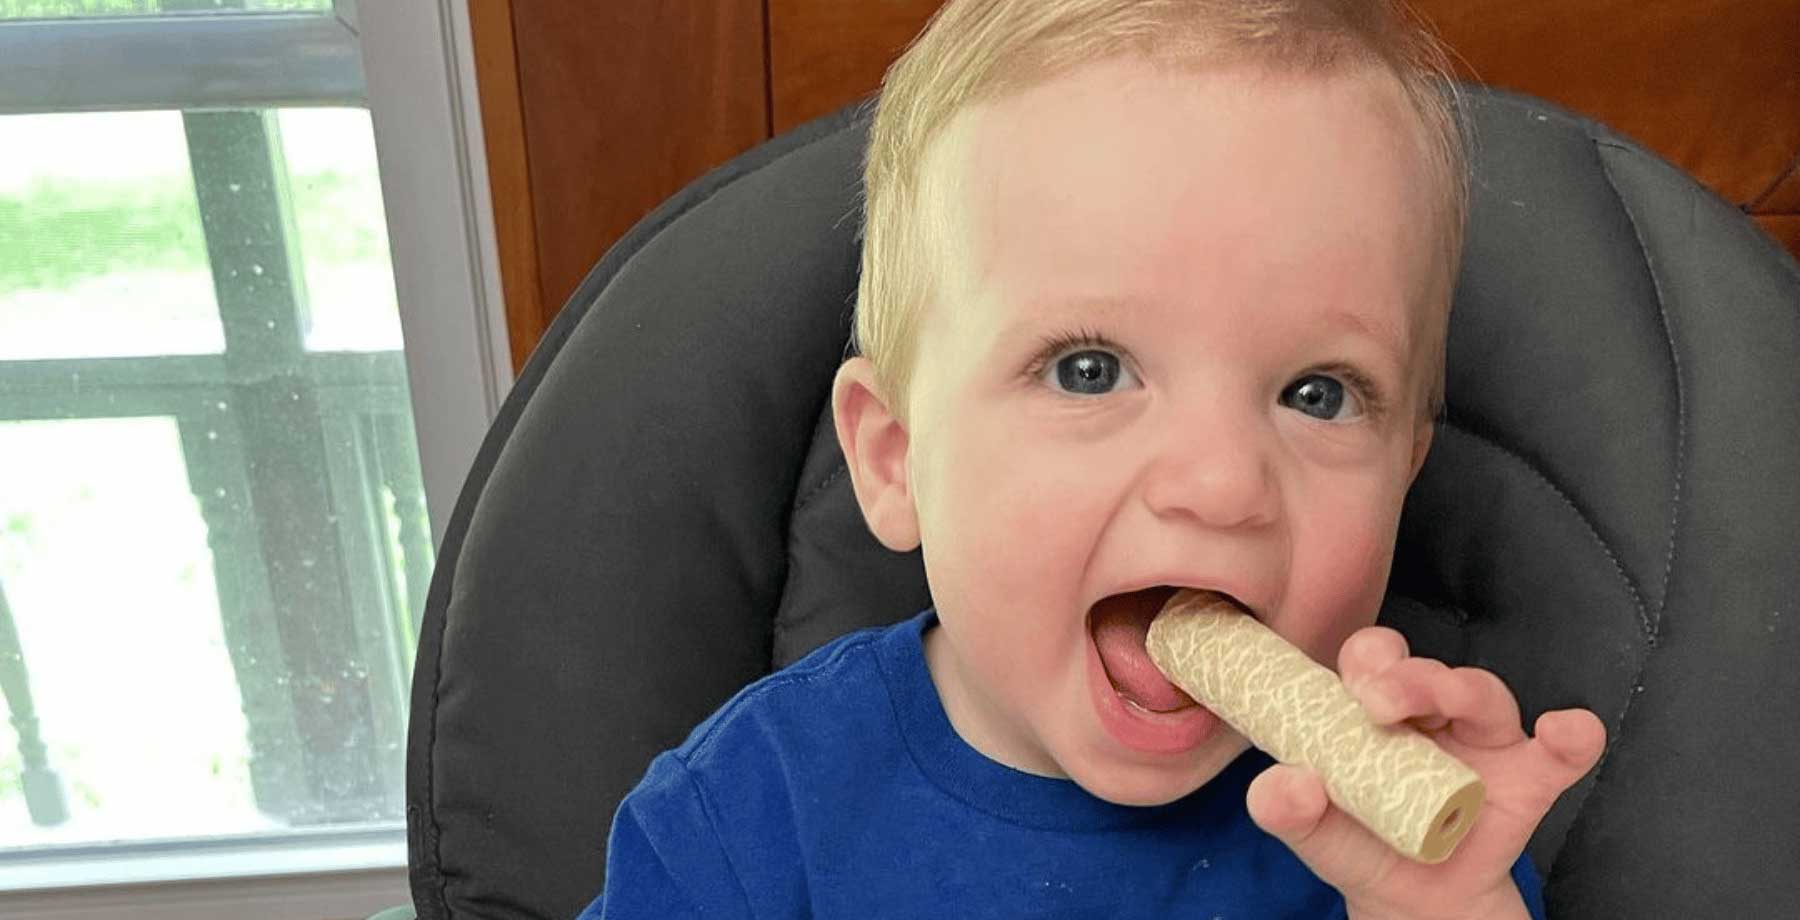 Three Edible Solutions To Help With Teething Pain - Parents Canada